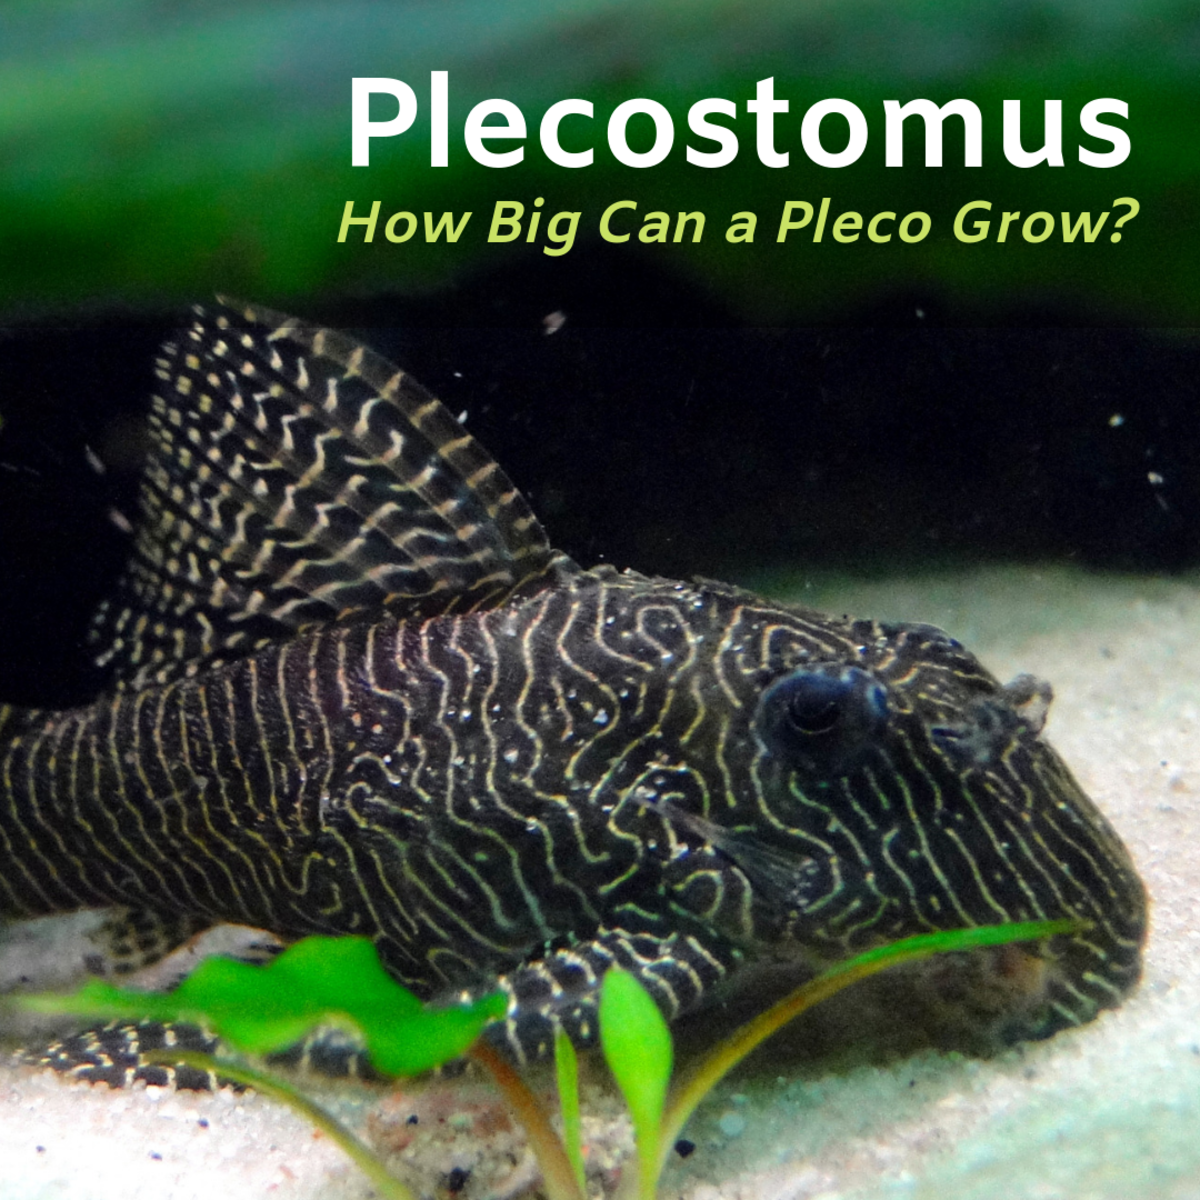 The pleco is a long-lived fish that typically grows to about 18 inches, though some are larger. Learn more about these distinctive fish.